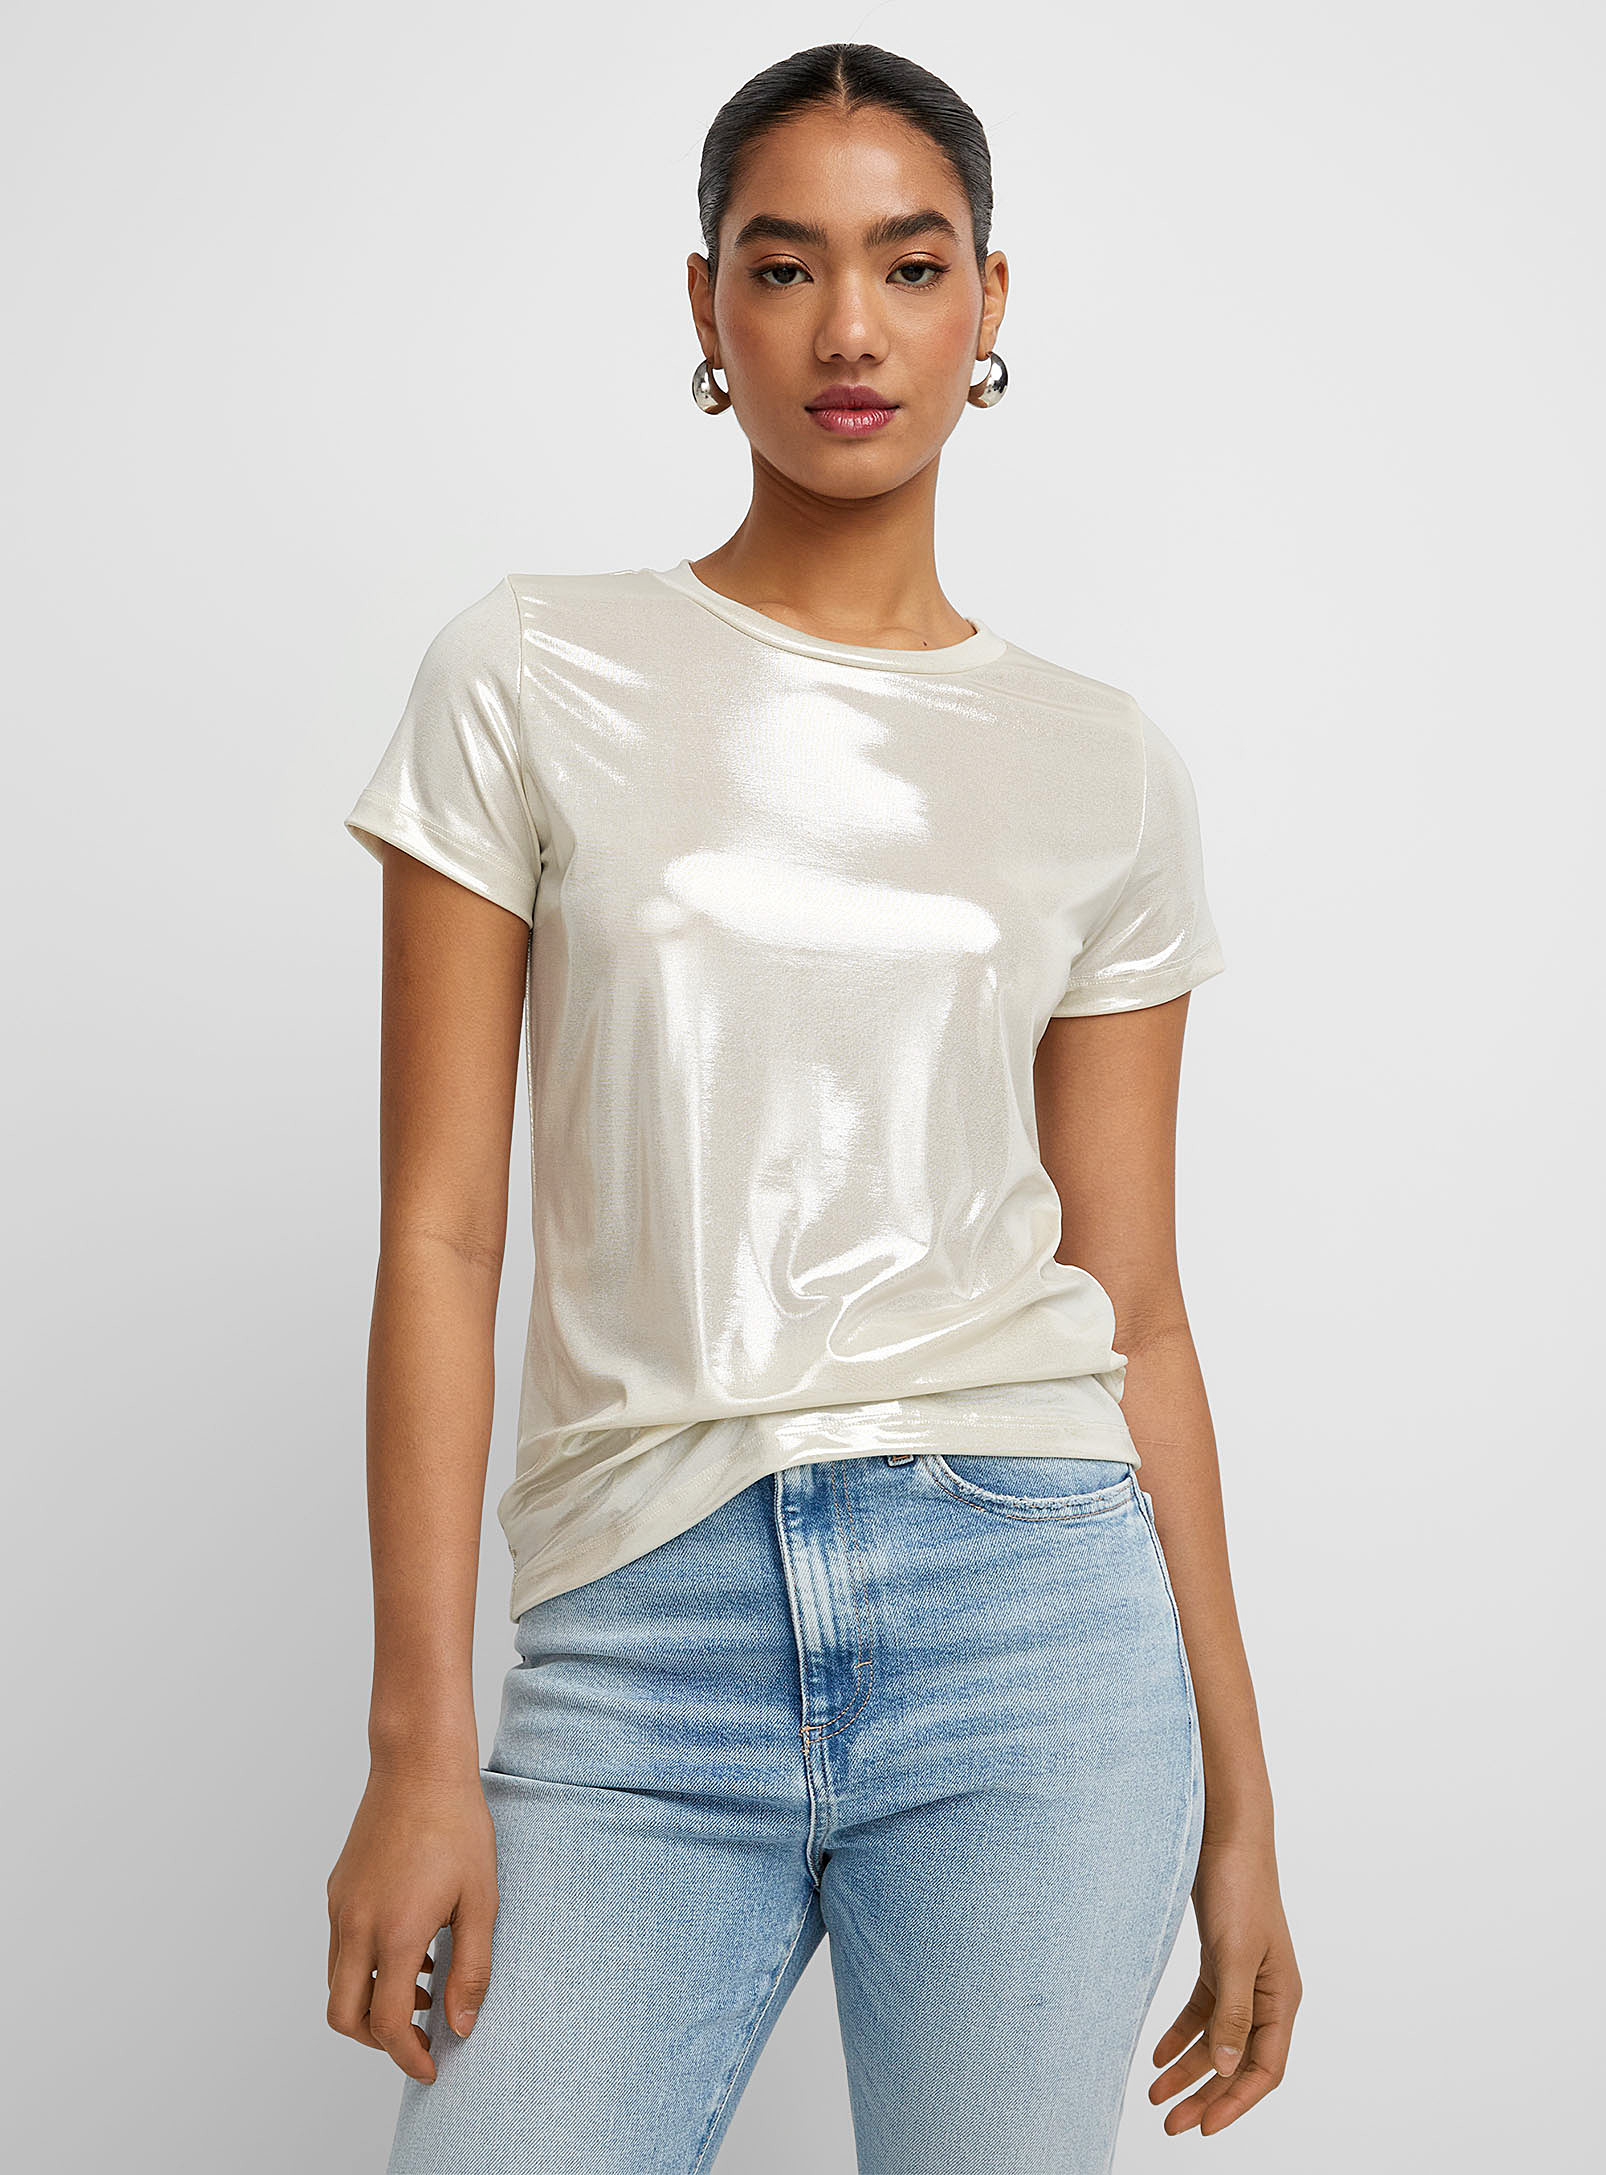 Icone Shimmering T-shirt In Ivory White